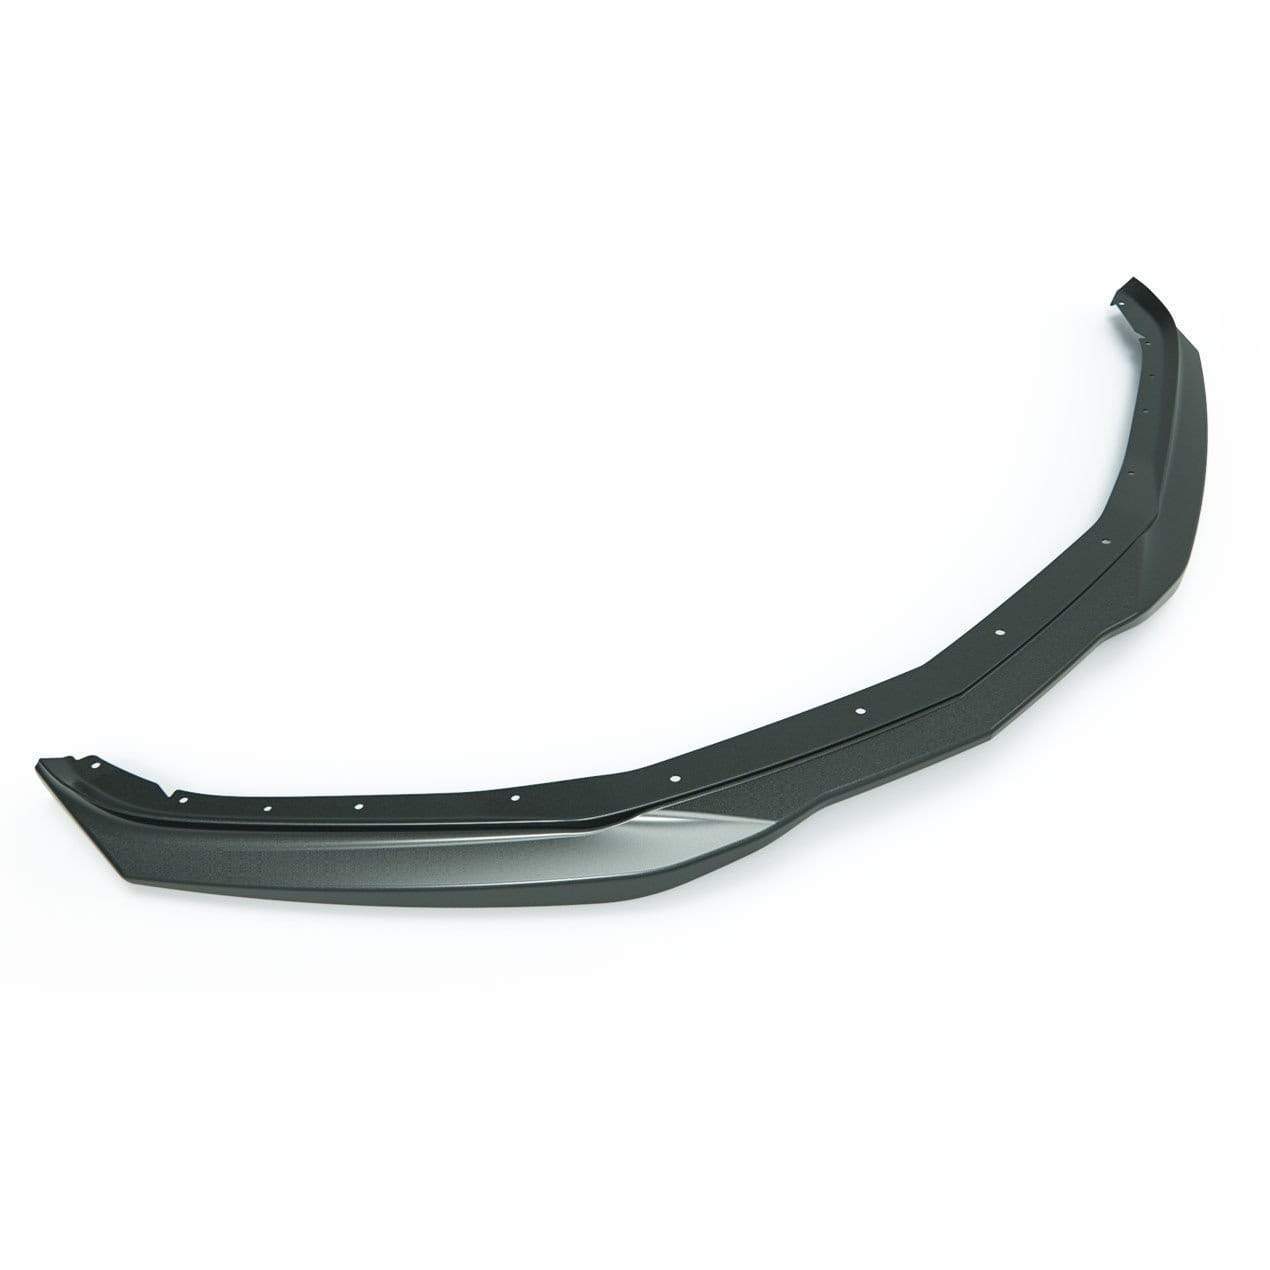 ACS Composite T6 Front Splitter in Primer with No Endcaps for Camaro 2019+ [48-4-001]PRM - Improved aerodynamics and style for your Camaro.